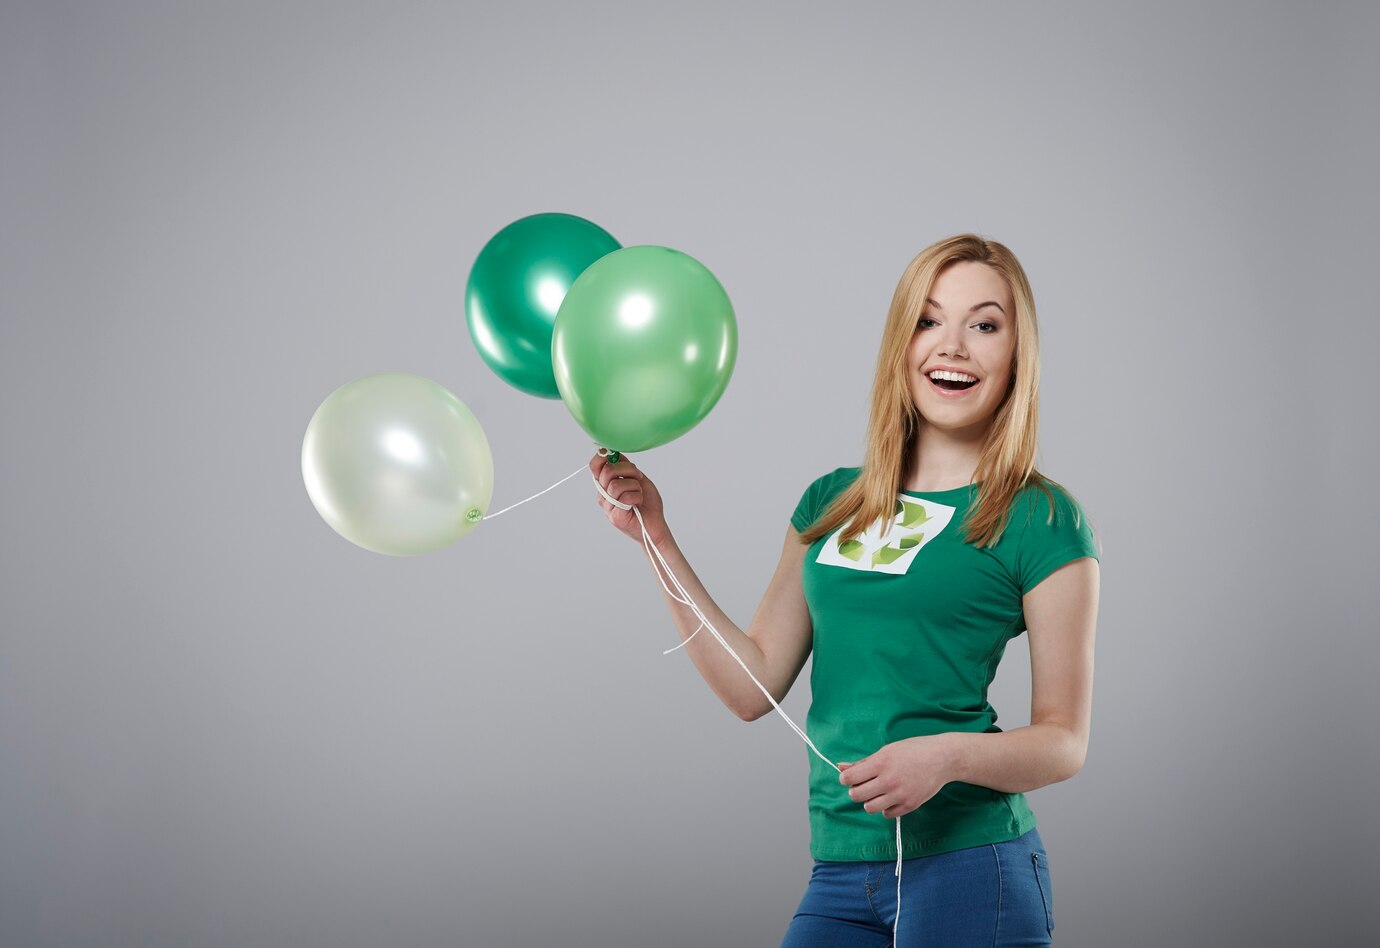 10 Reasons to Order Green Balloons for Your Party